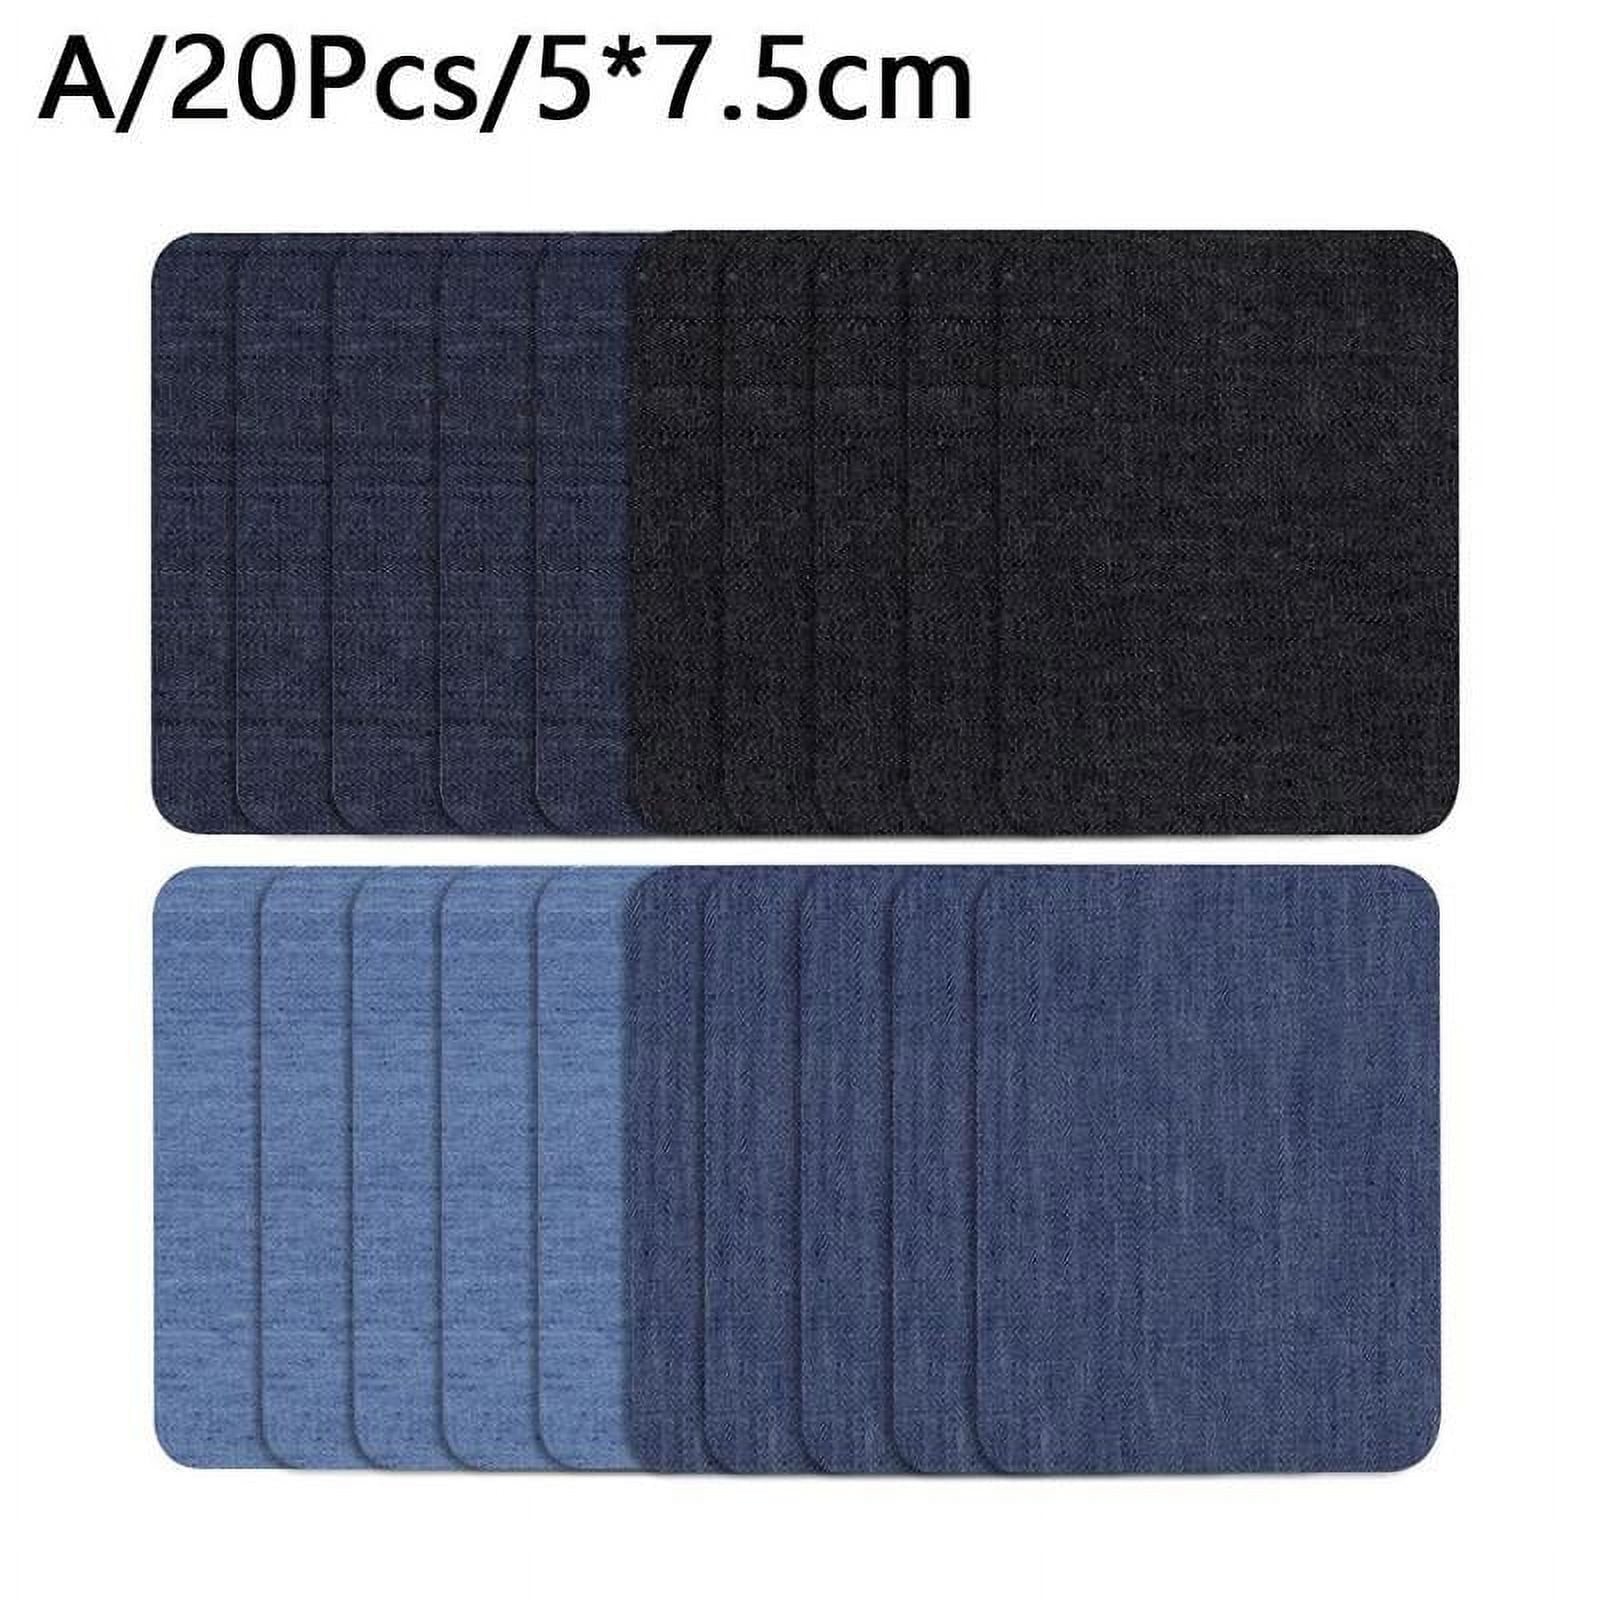 Jeans Elbow Fabric Denim Patches Clothes DIY Repair Pants Knee Applique  Apparel Jeans Self-Adhesive Hole Repair Patches